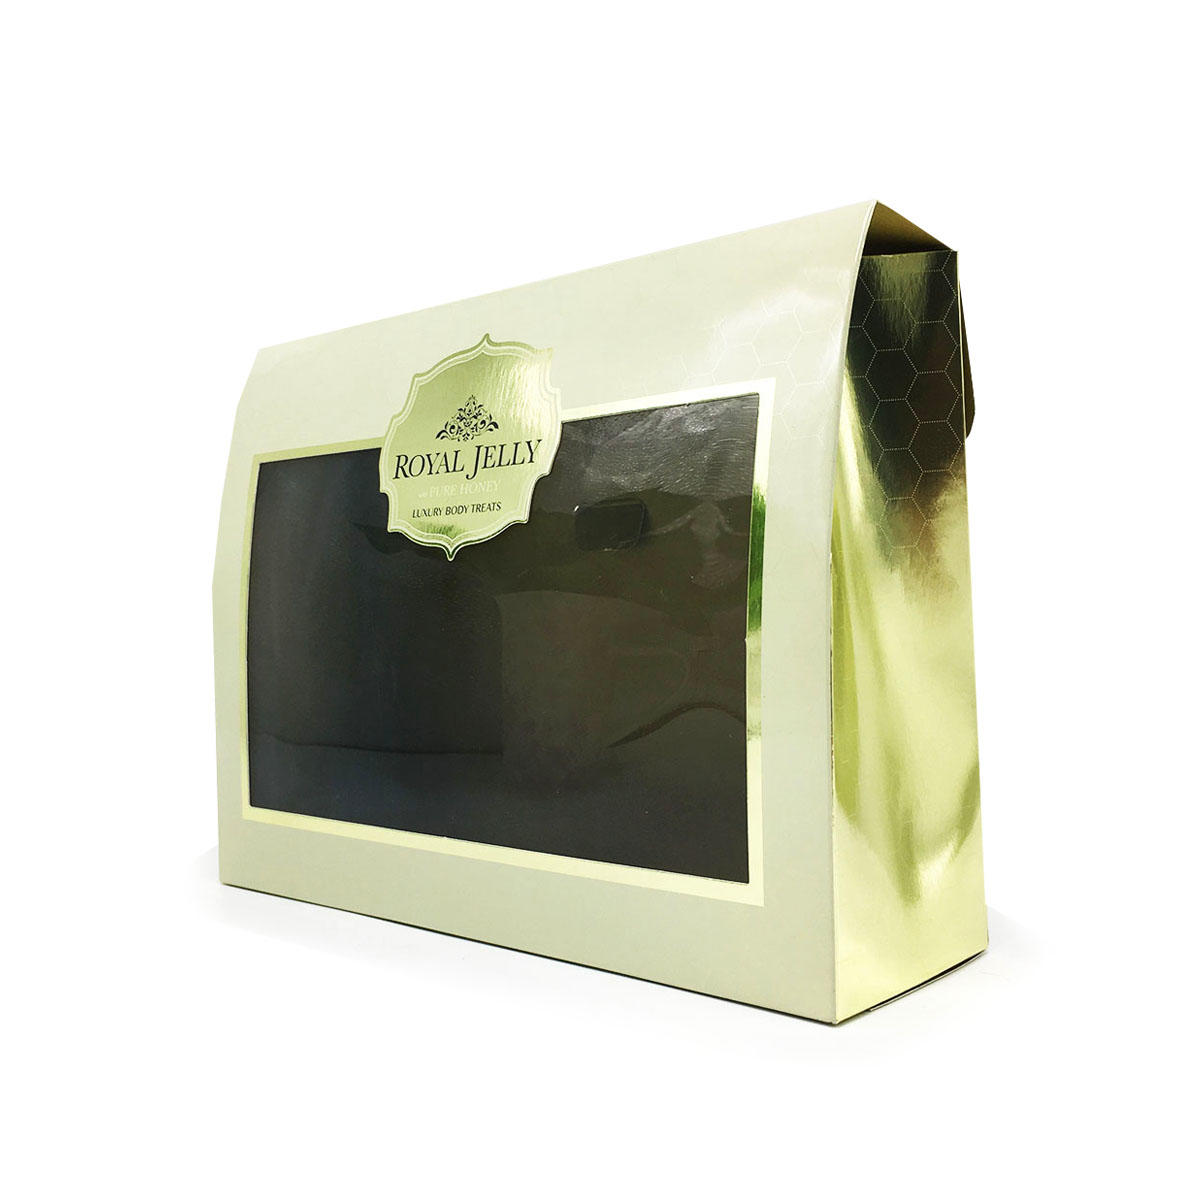 High quality cosmetic packaging box with clear transparent PVC window with luxury gold foil color